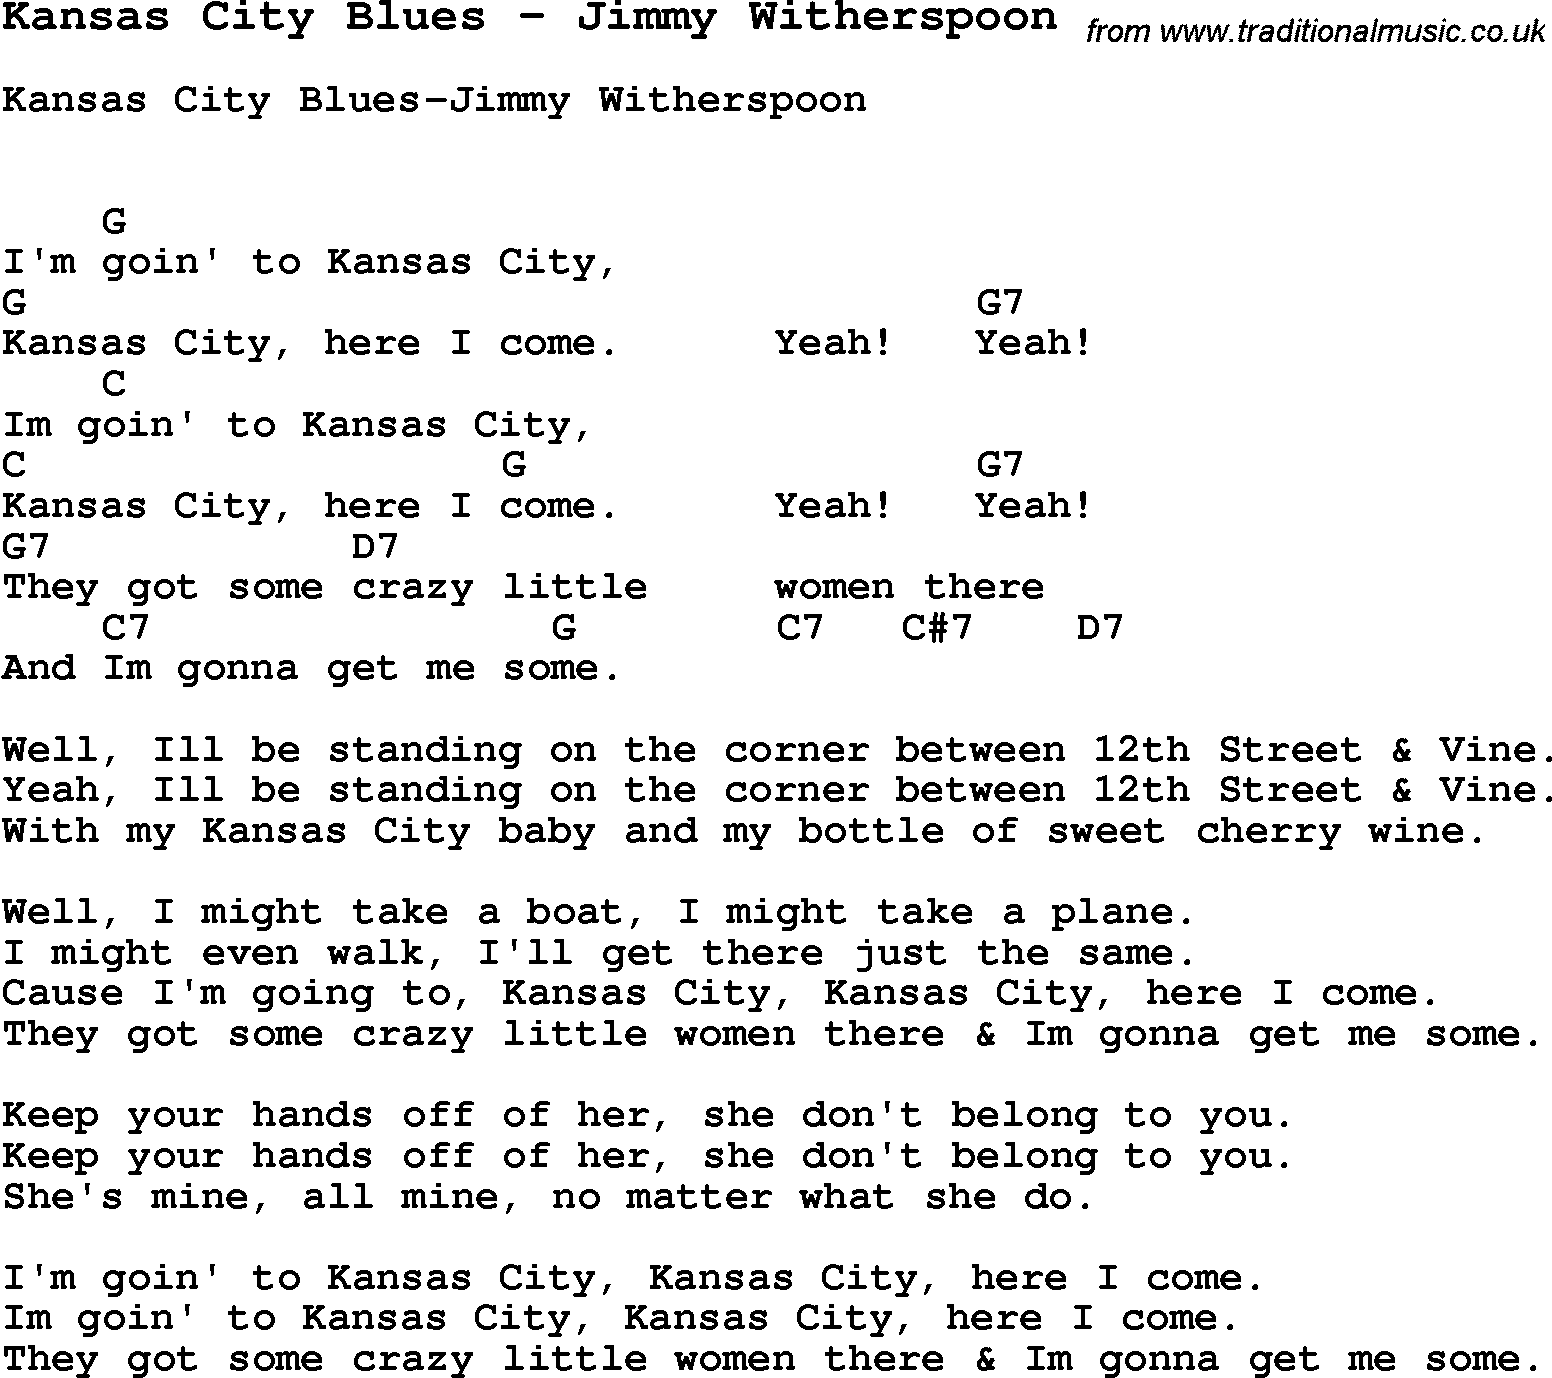 Song Kansas City Blues by Jimmy Witherspoon, with lyrics for vocal performance and accompaniment chords for Ukulele, Guitar Banjo etc.